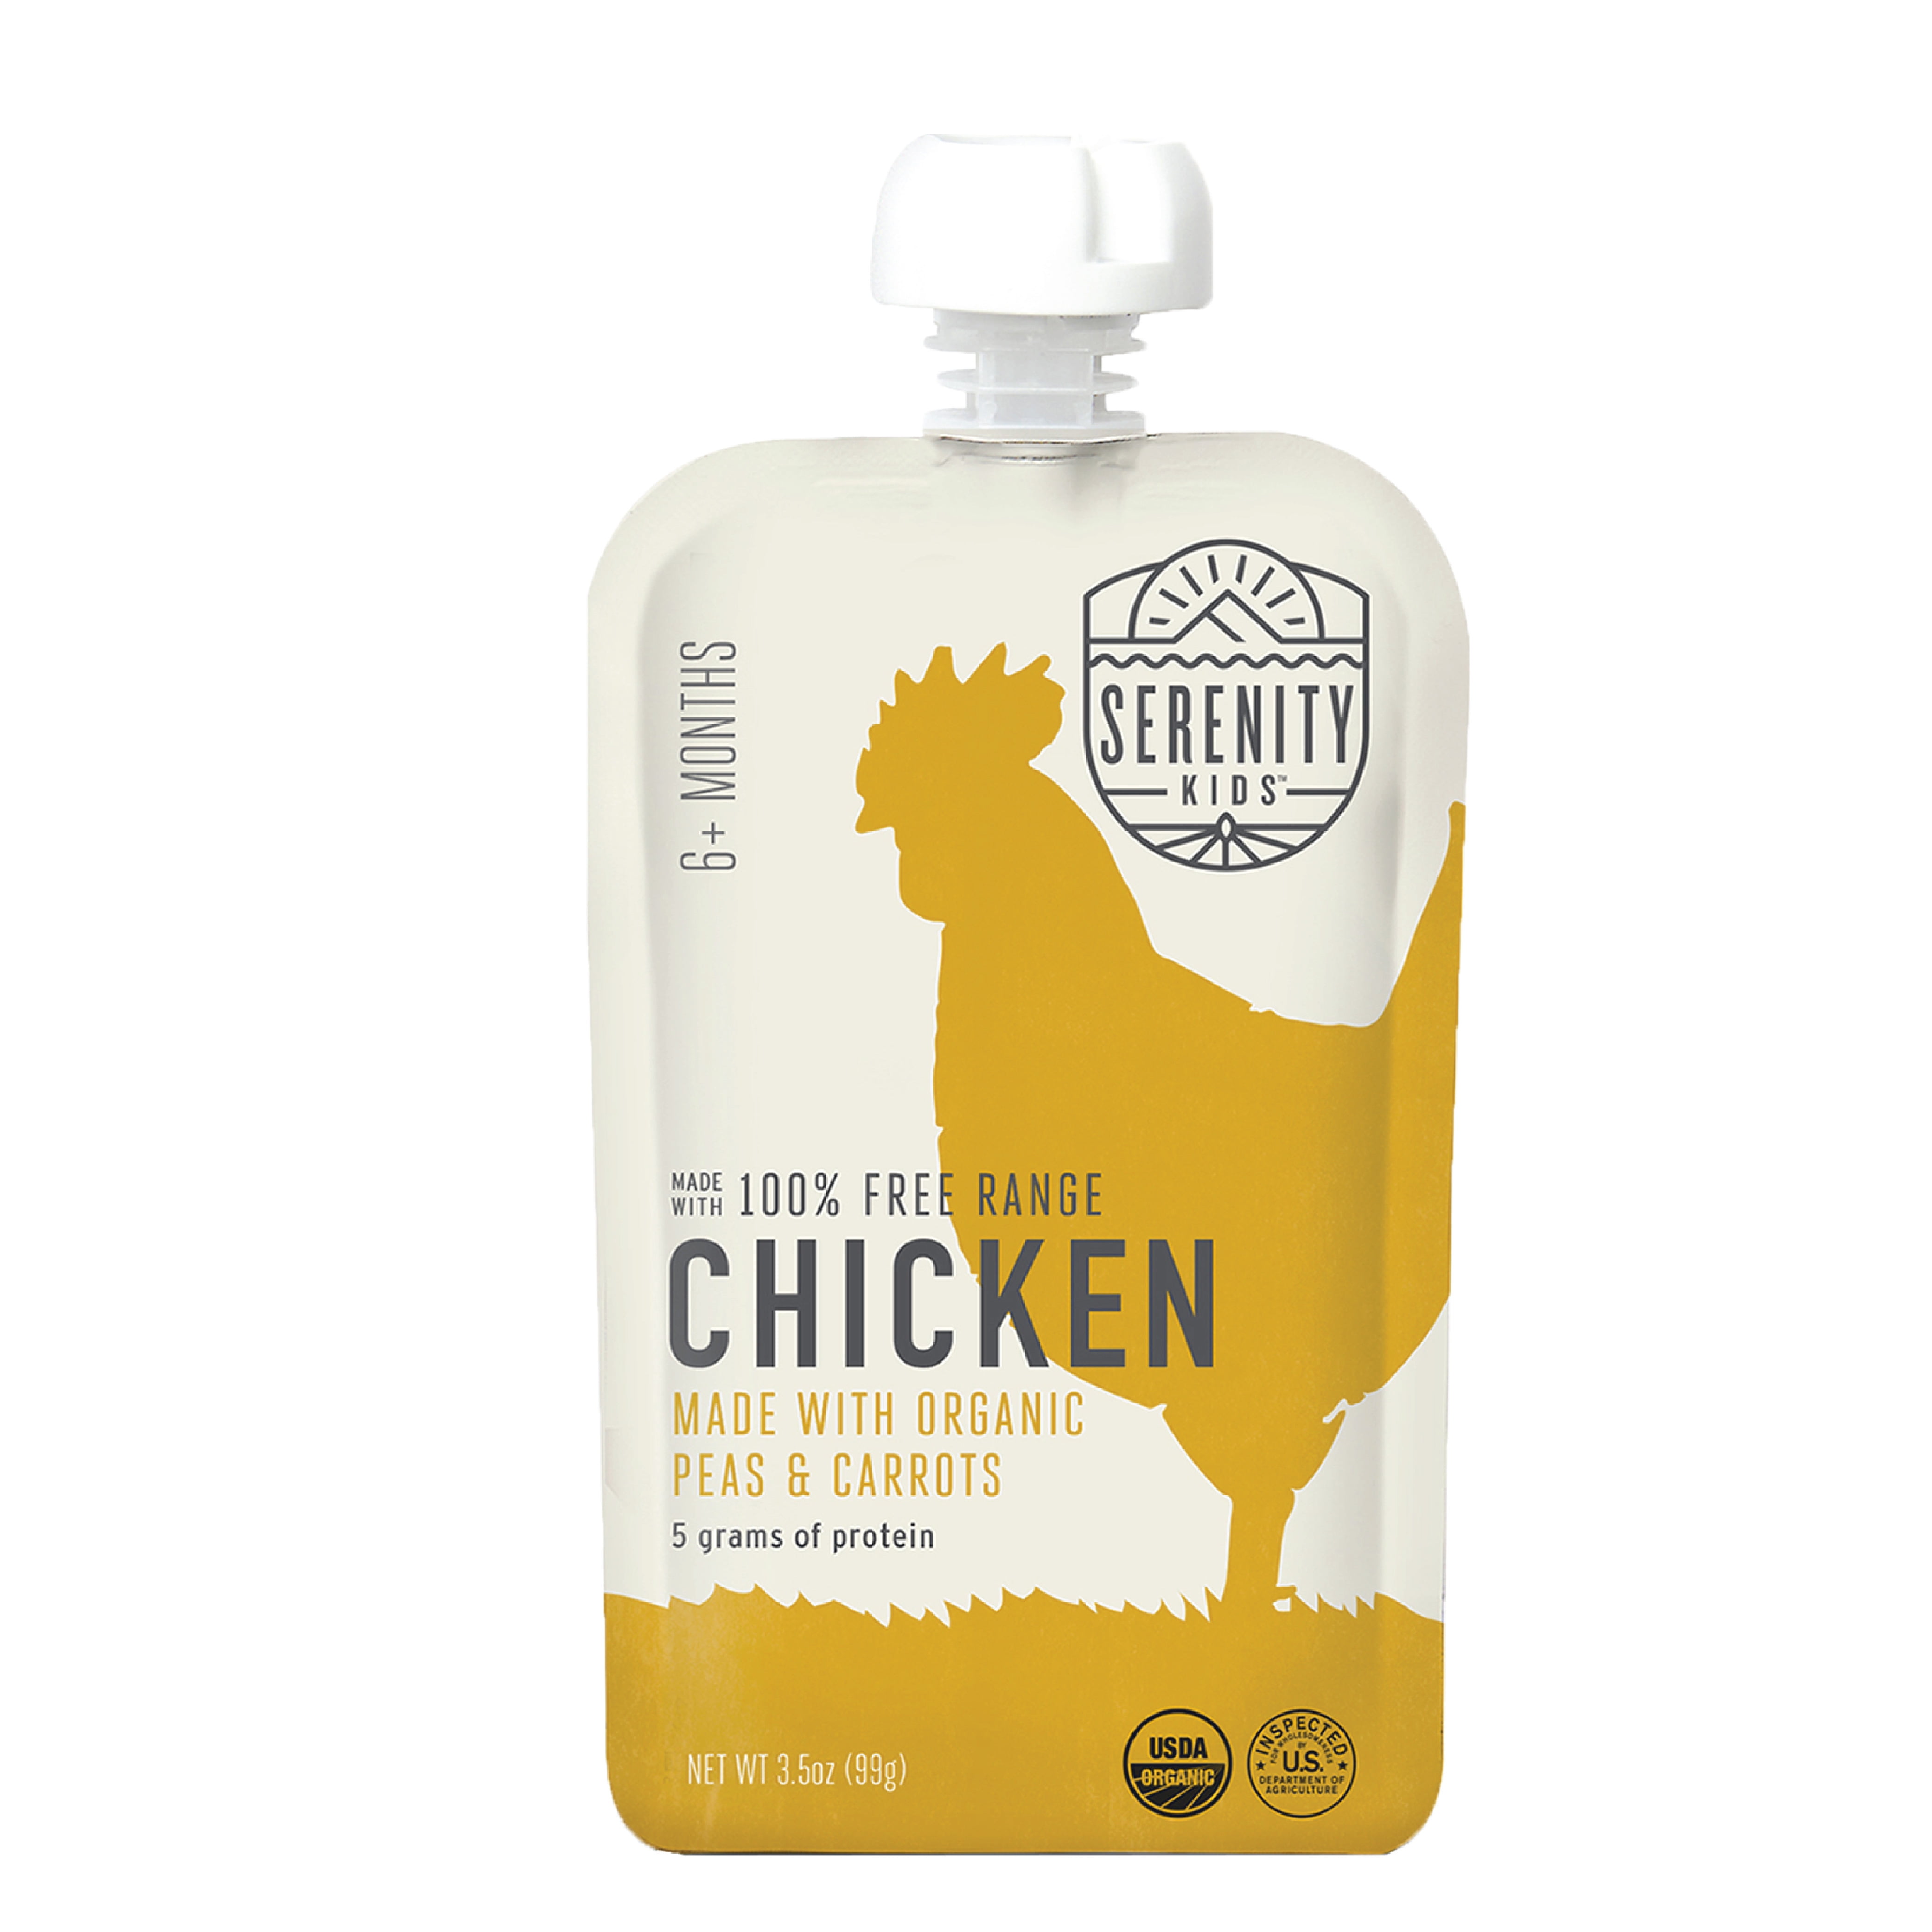 Serenity Kids Organic Stage 2 Baby Food, Free-Range Chicken with Peas and Carrots, 3.5 oz Pouch